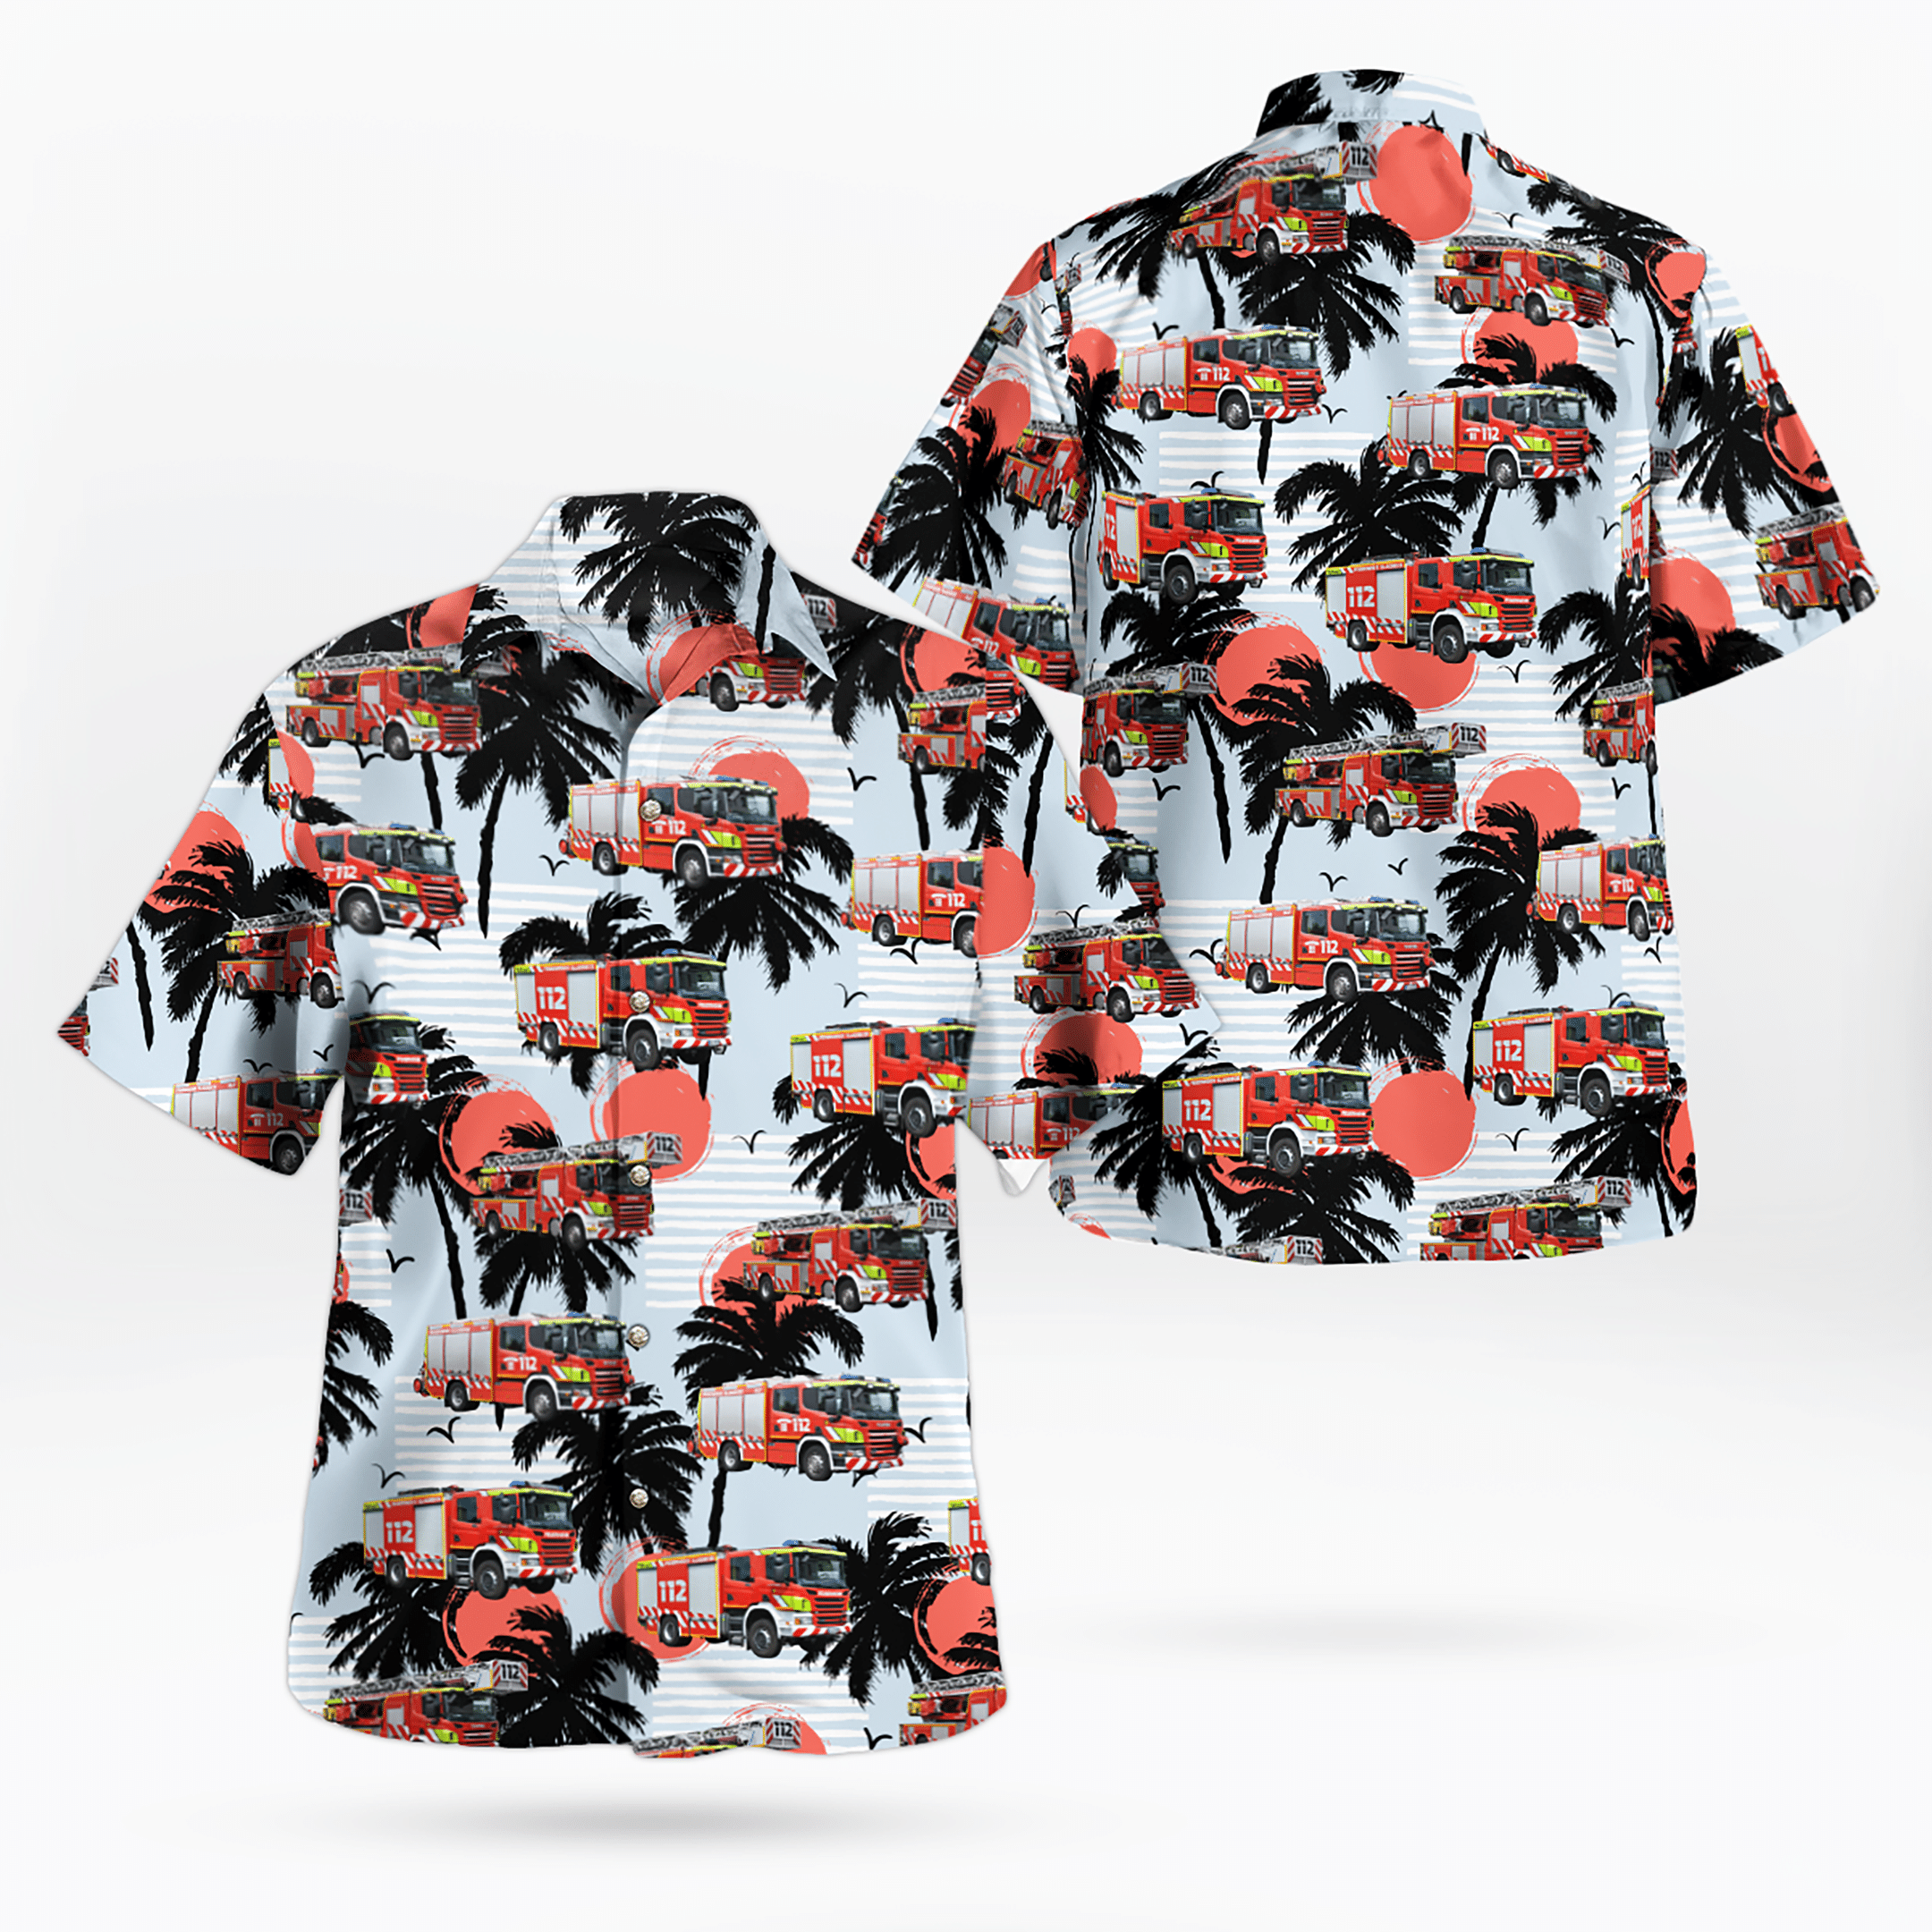 If you are in need of a new summertime look, pick up this Hawaiian shirt 141